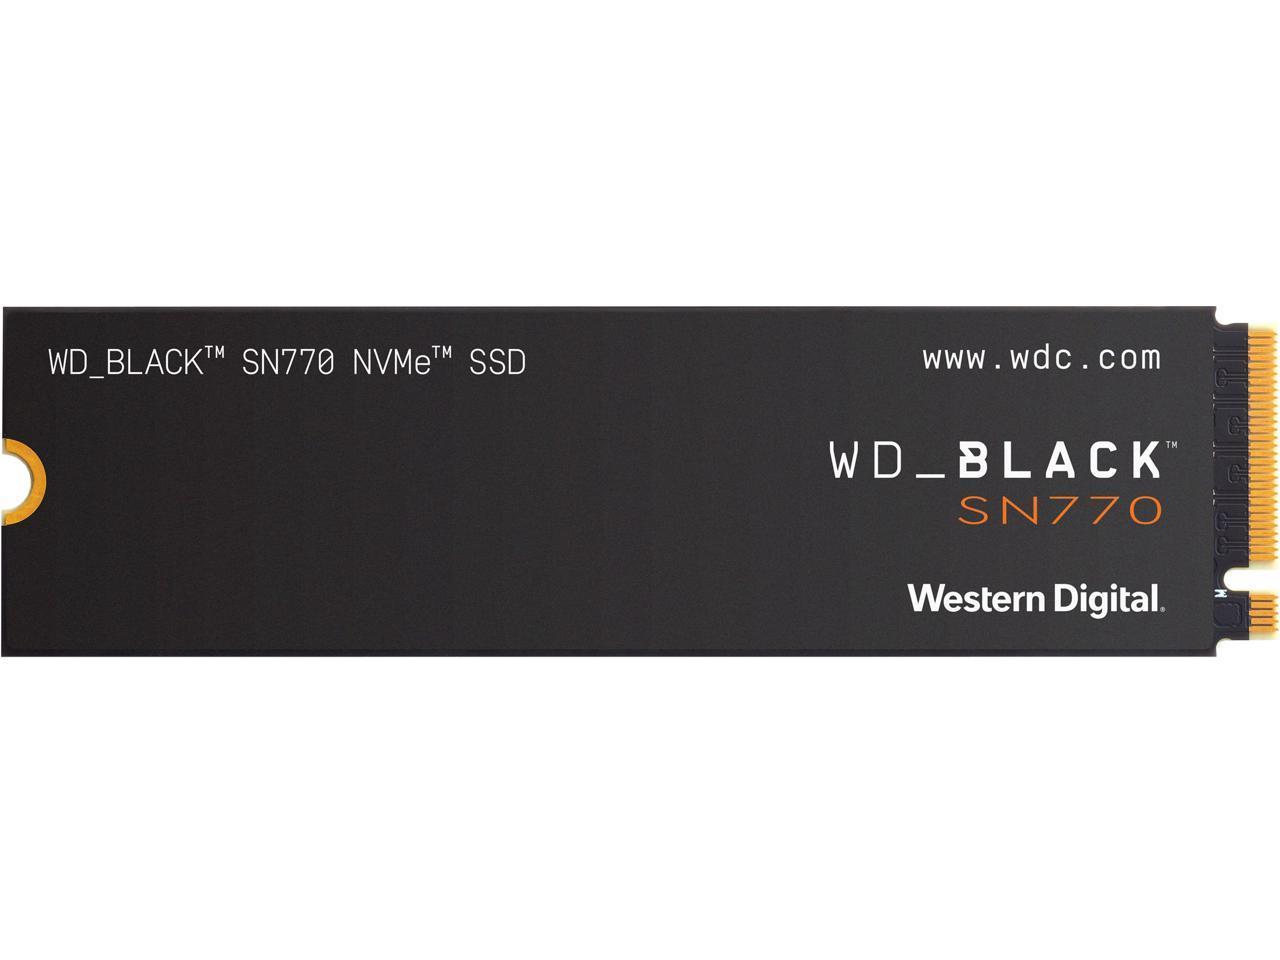 1TB Western Digital M2 2280 PCIe Gen4 Solid State Drive SSD for $104.99 Shipped